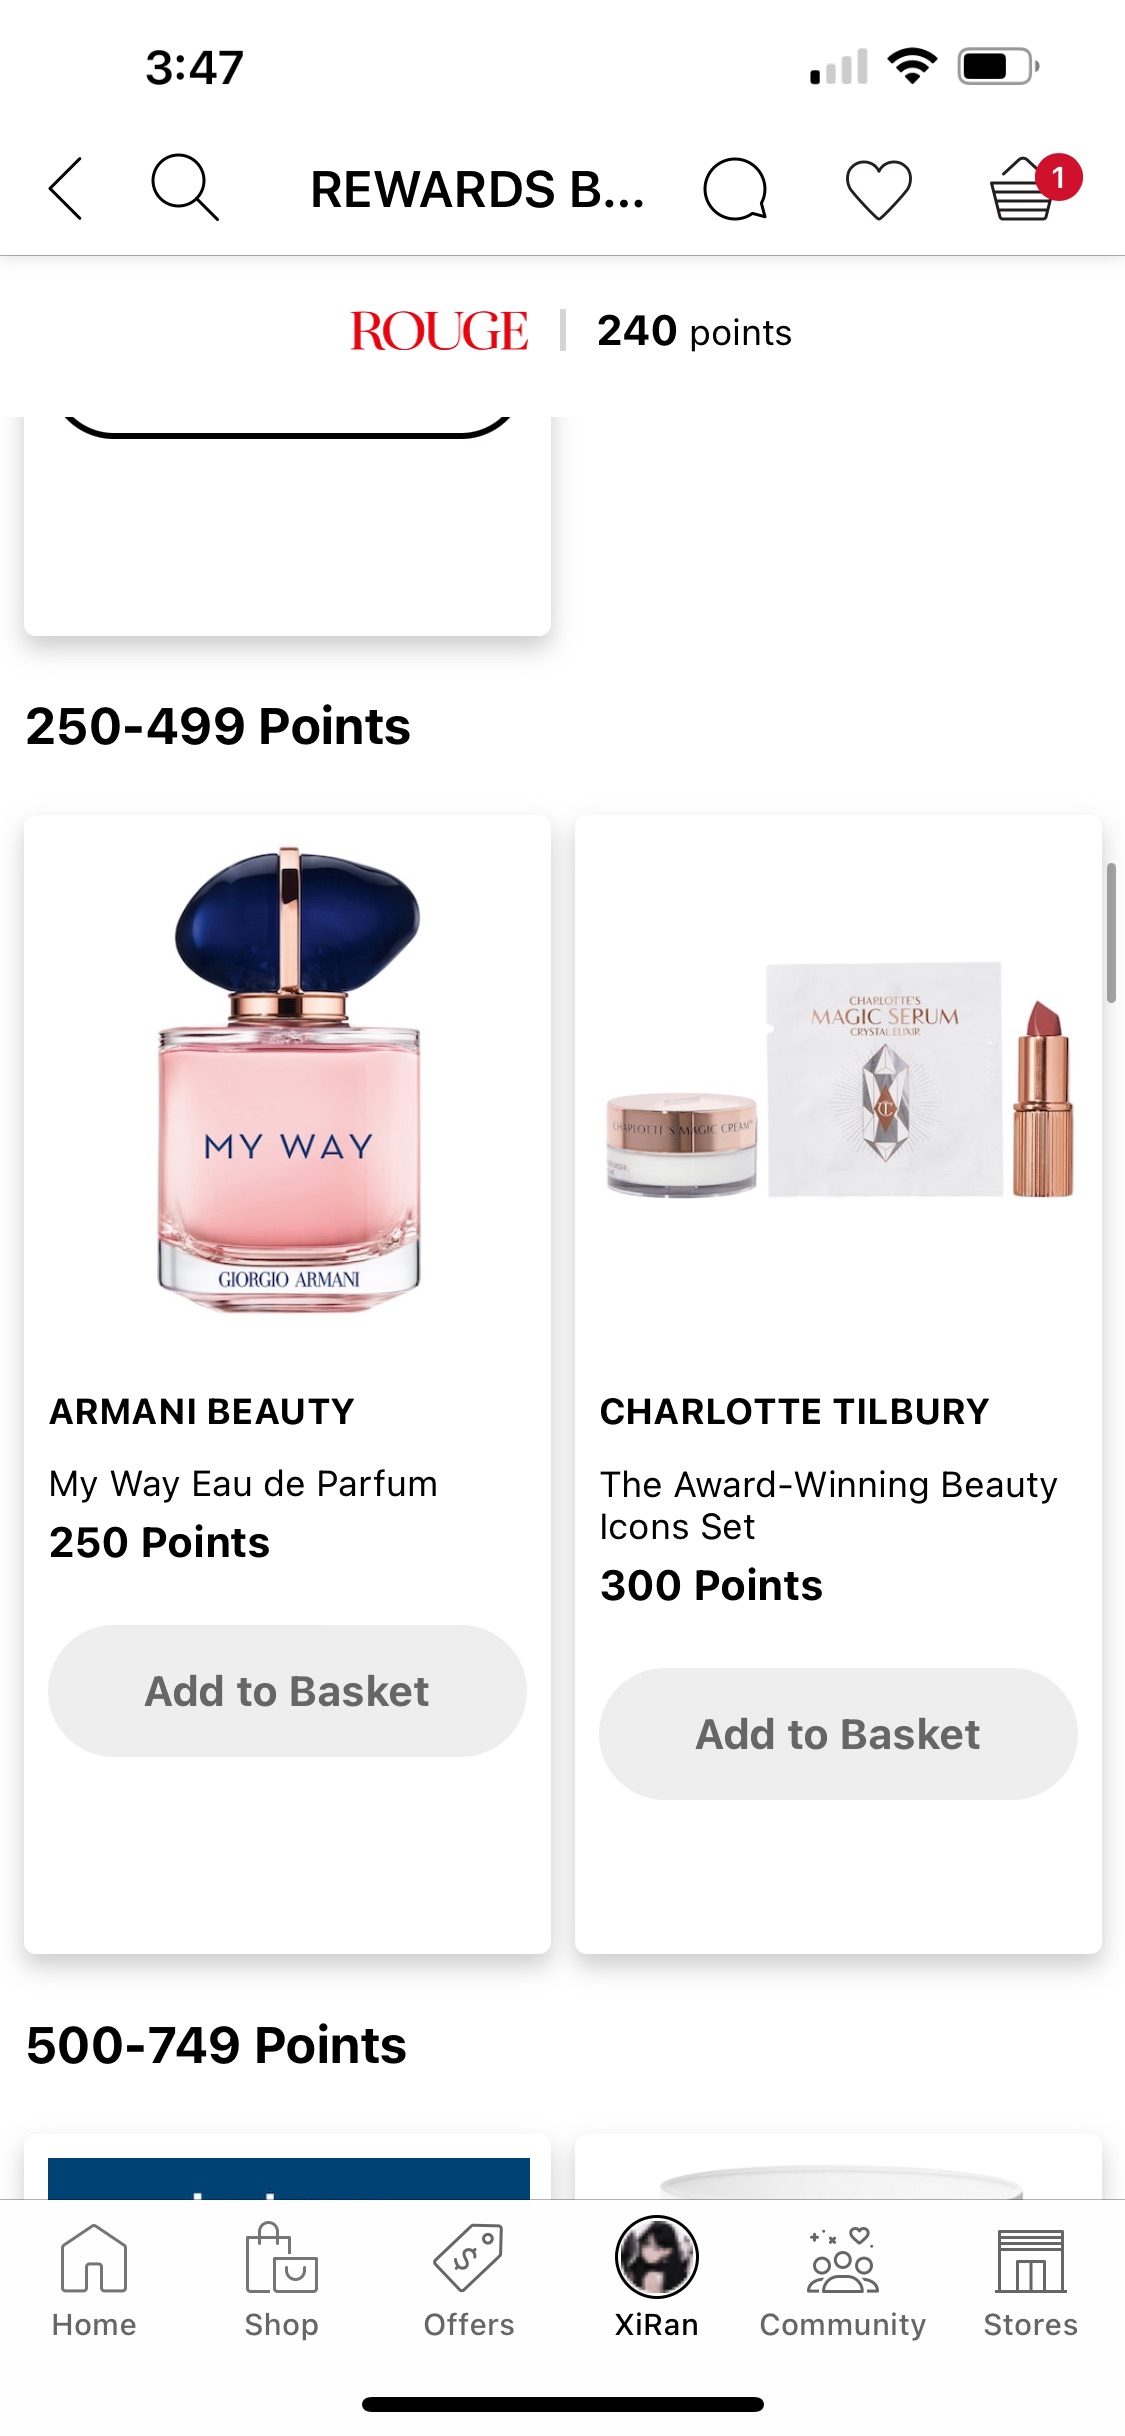 Makeup, Skincare, Fragrance, Hair & Beauty Products | Sephora